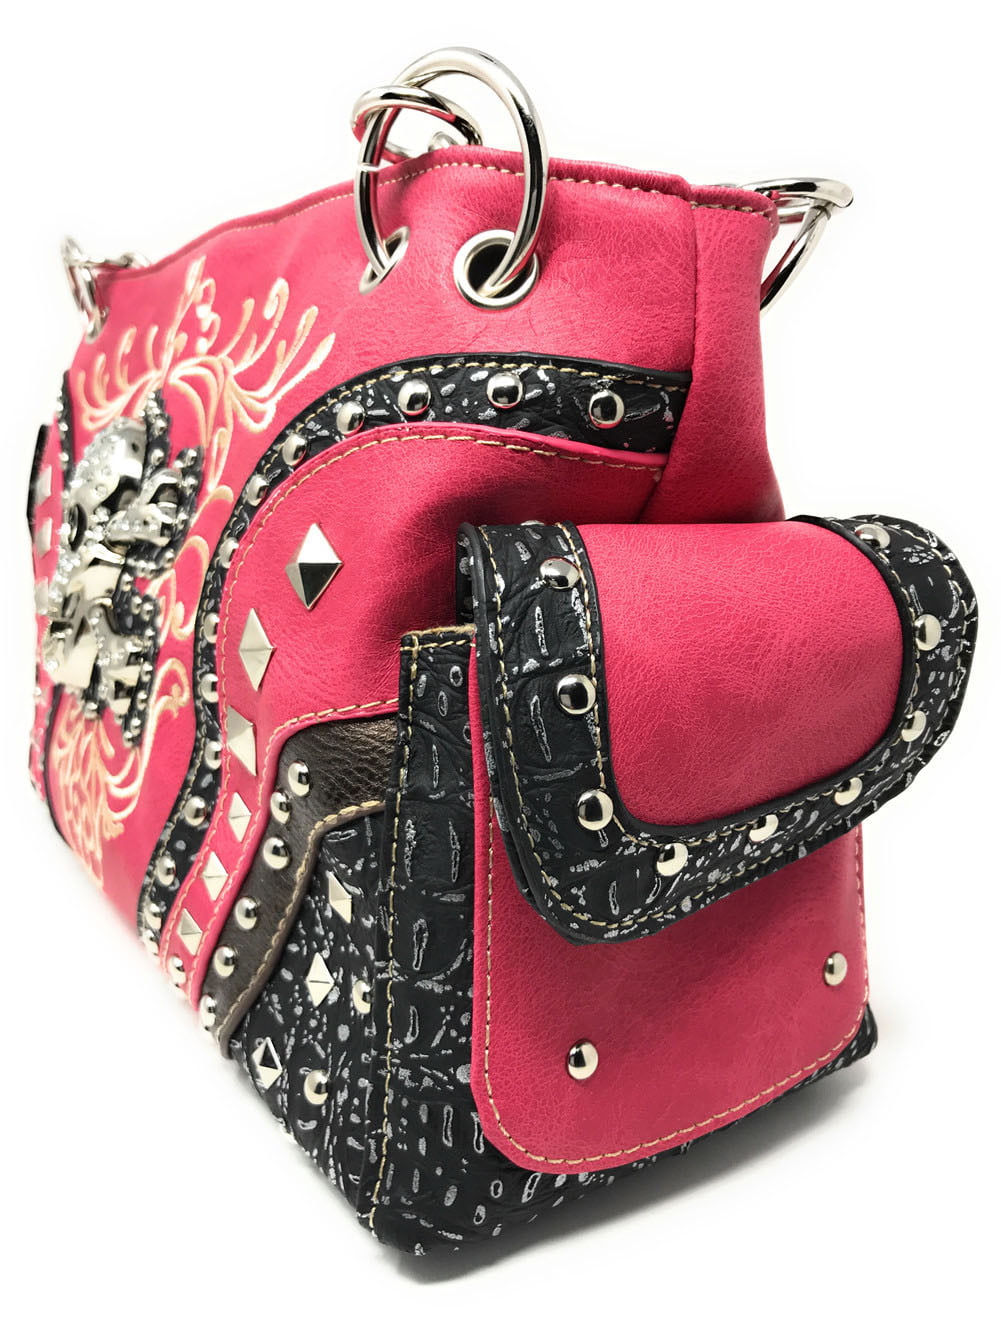 Texas West Rhinestone Embroidered Metal Skull Leather Women's Handbag With Matching  Wallets in 7 Colors. - Walmart.com